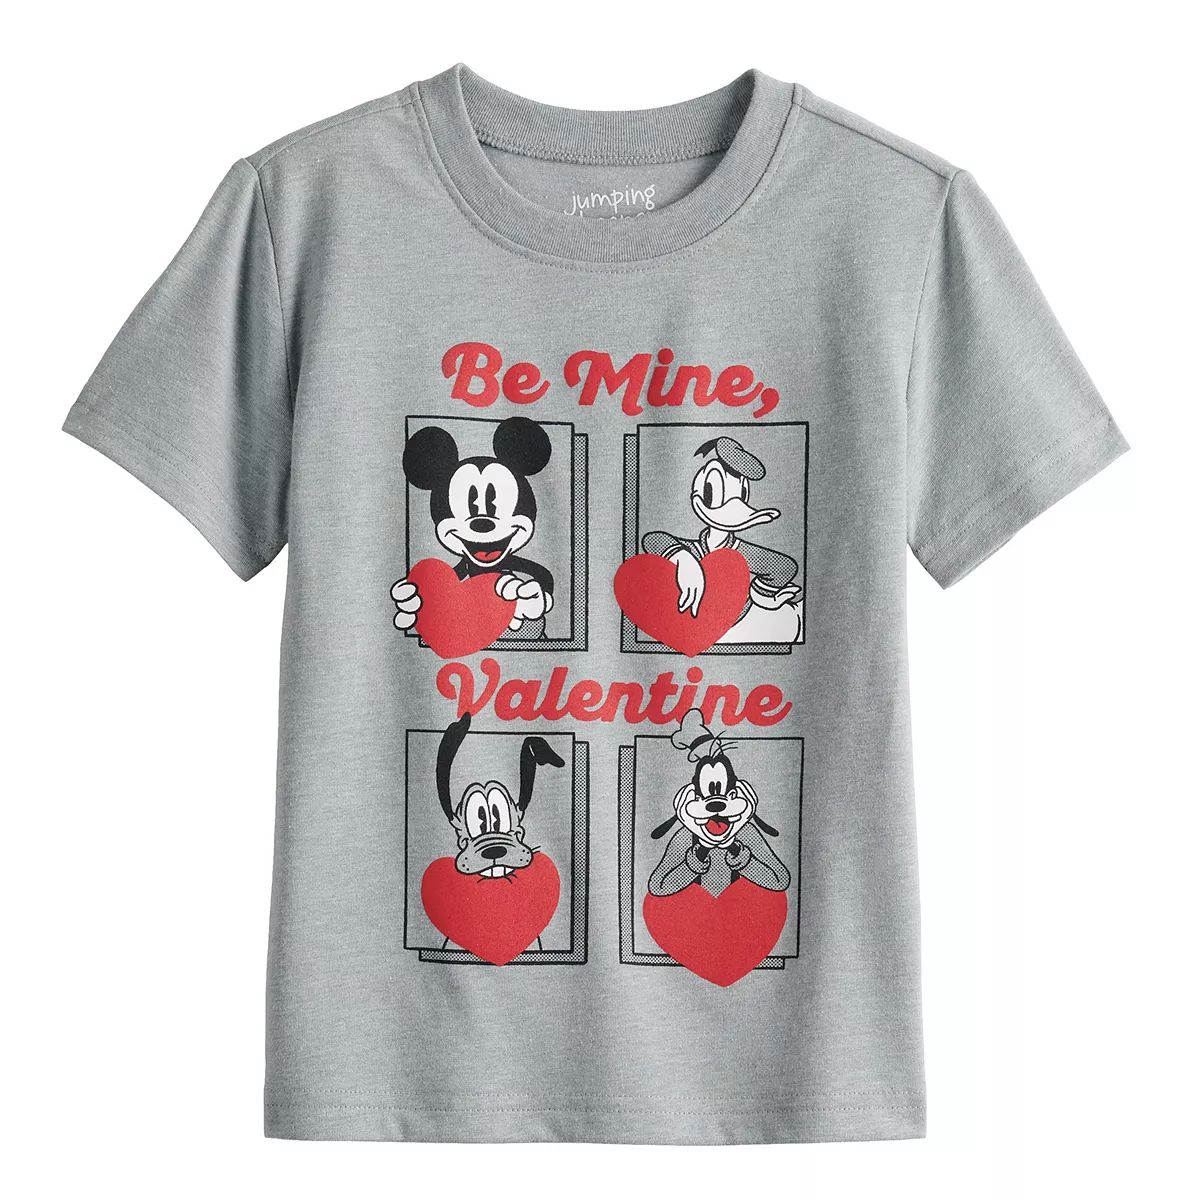 Disney's Mickey Mouse & Friends Toddler Boy "Be Mine" Graphic Tee by Jumping Beans® | Kohl's